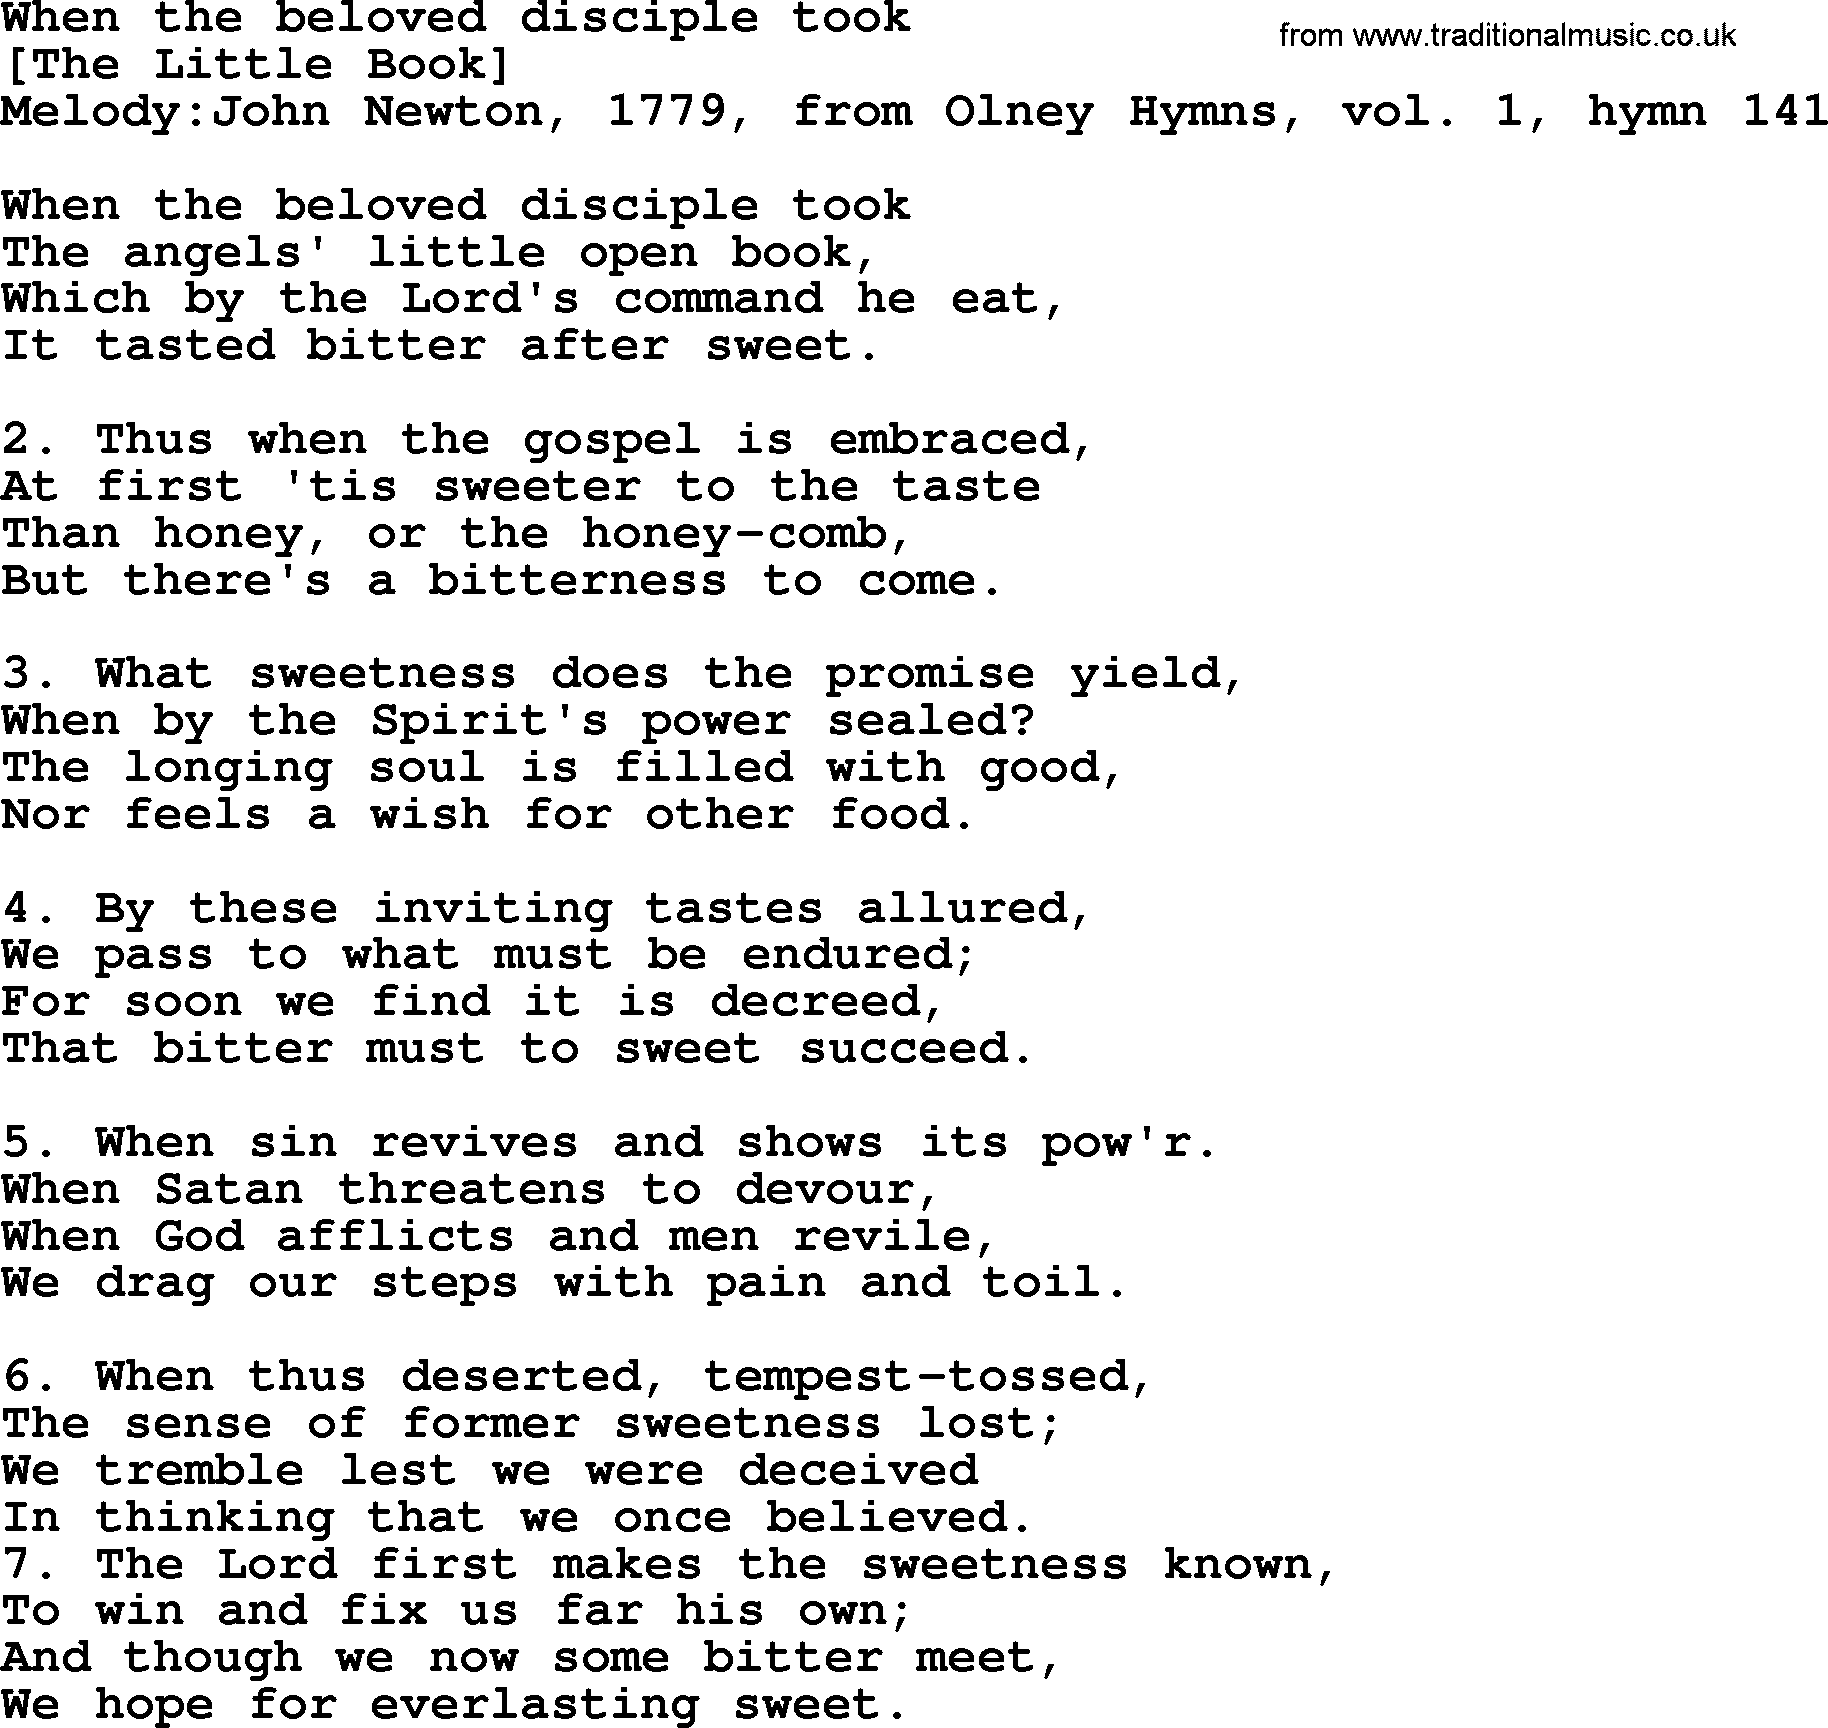 Old English Song: When The Beloved Disciple Took lyrics